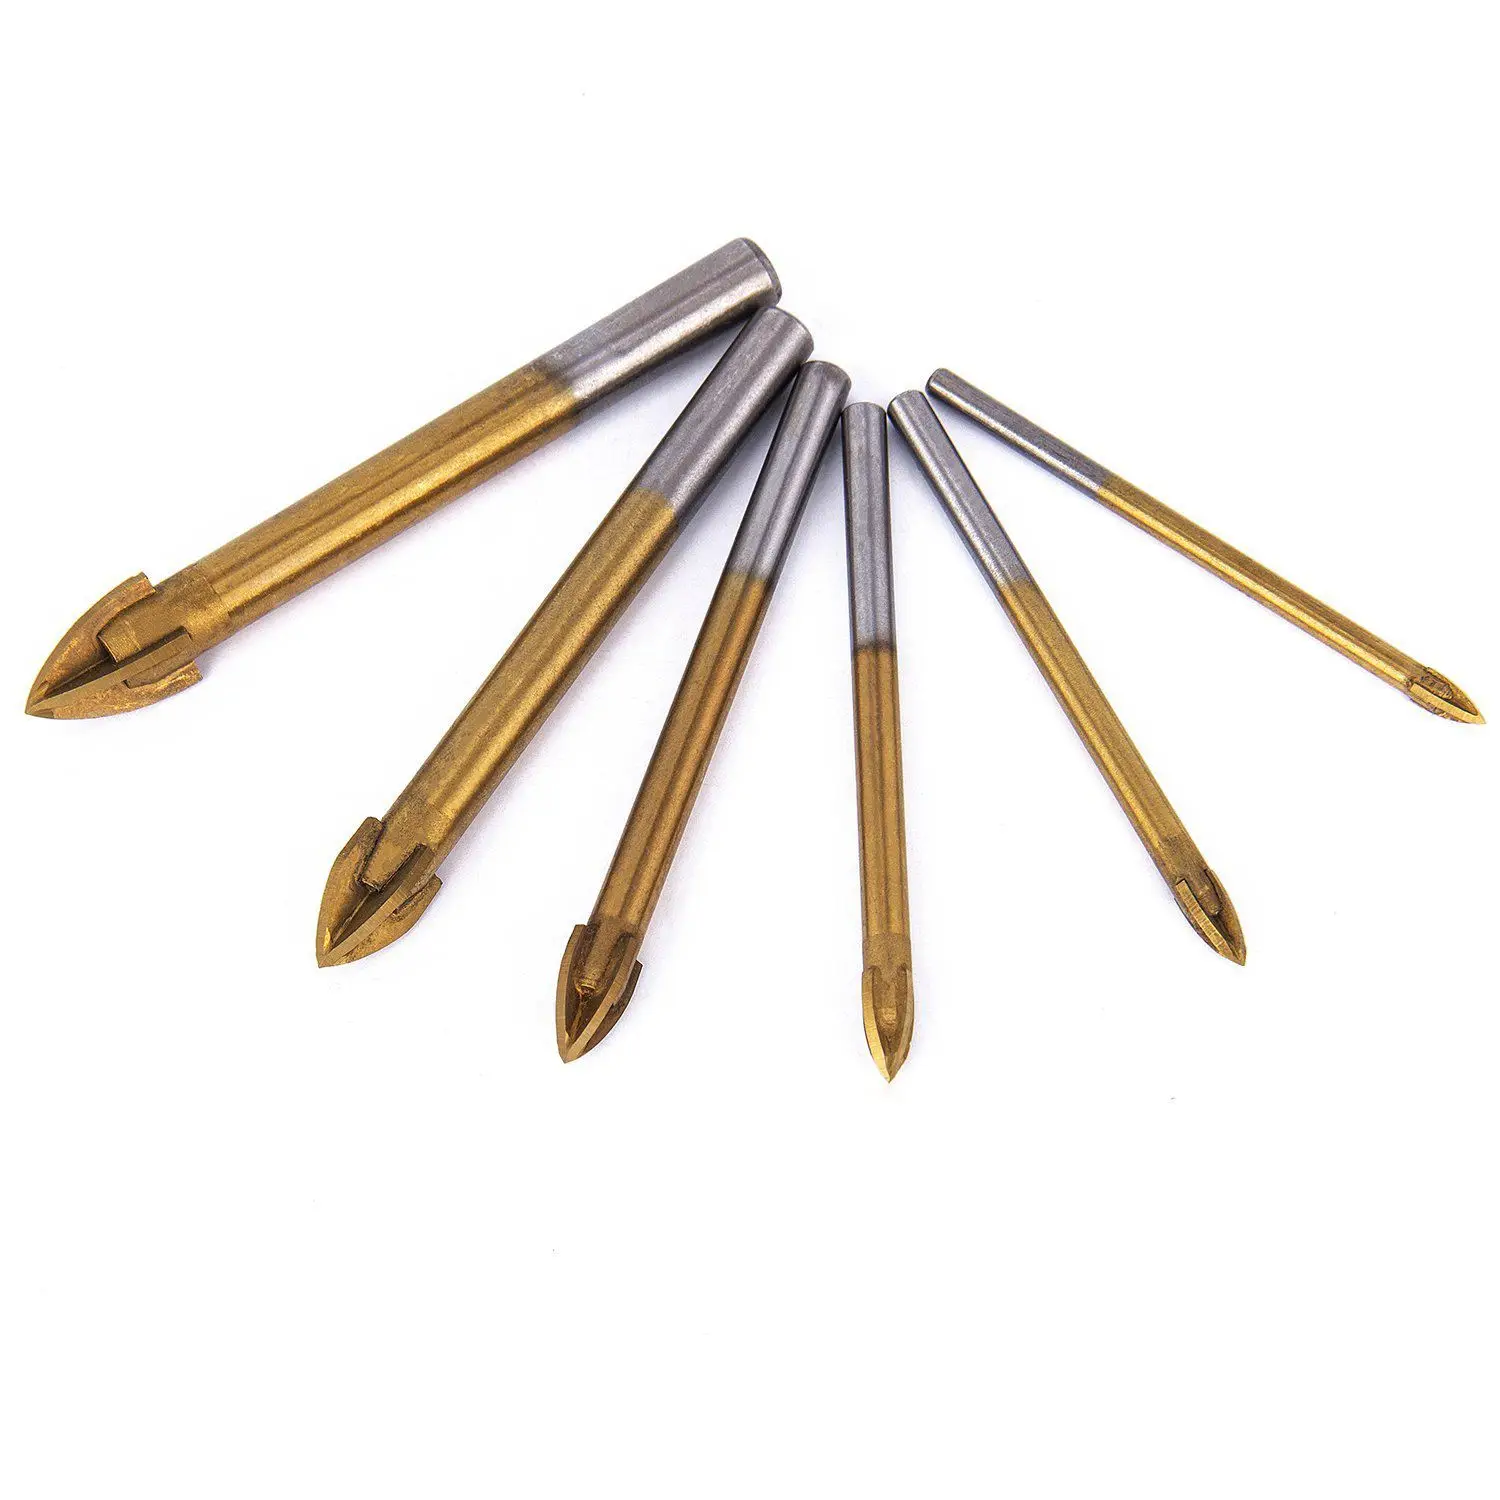 

6pcs Titanium Coated Glass Drill Bits Set 4 Cutting Edges Cross Spear Head Drill with Hex Shank for Ceramic Tile Marble Mirro